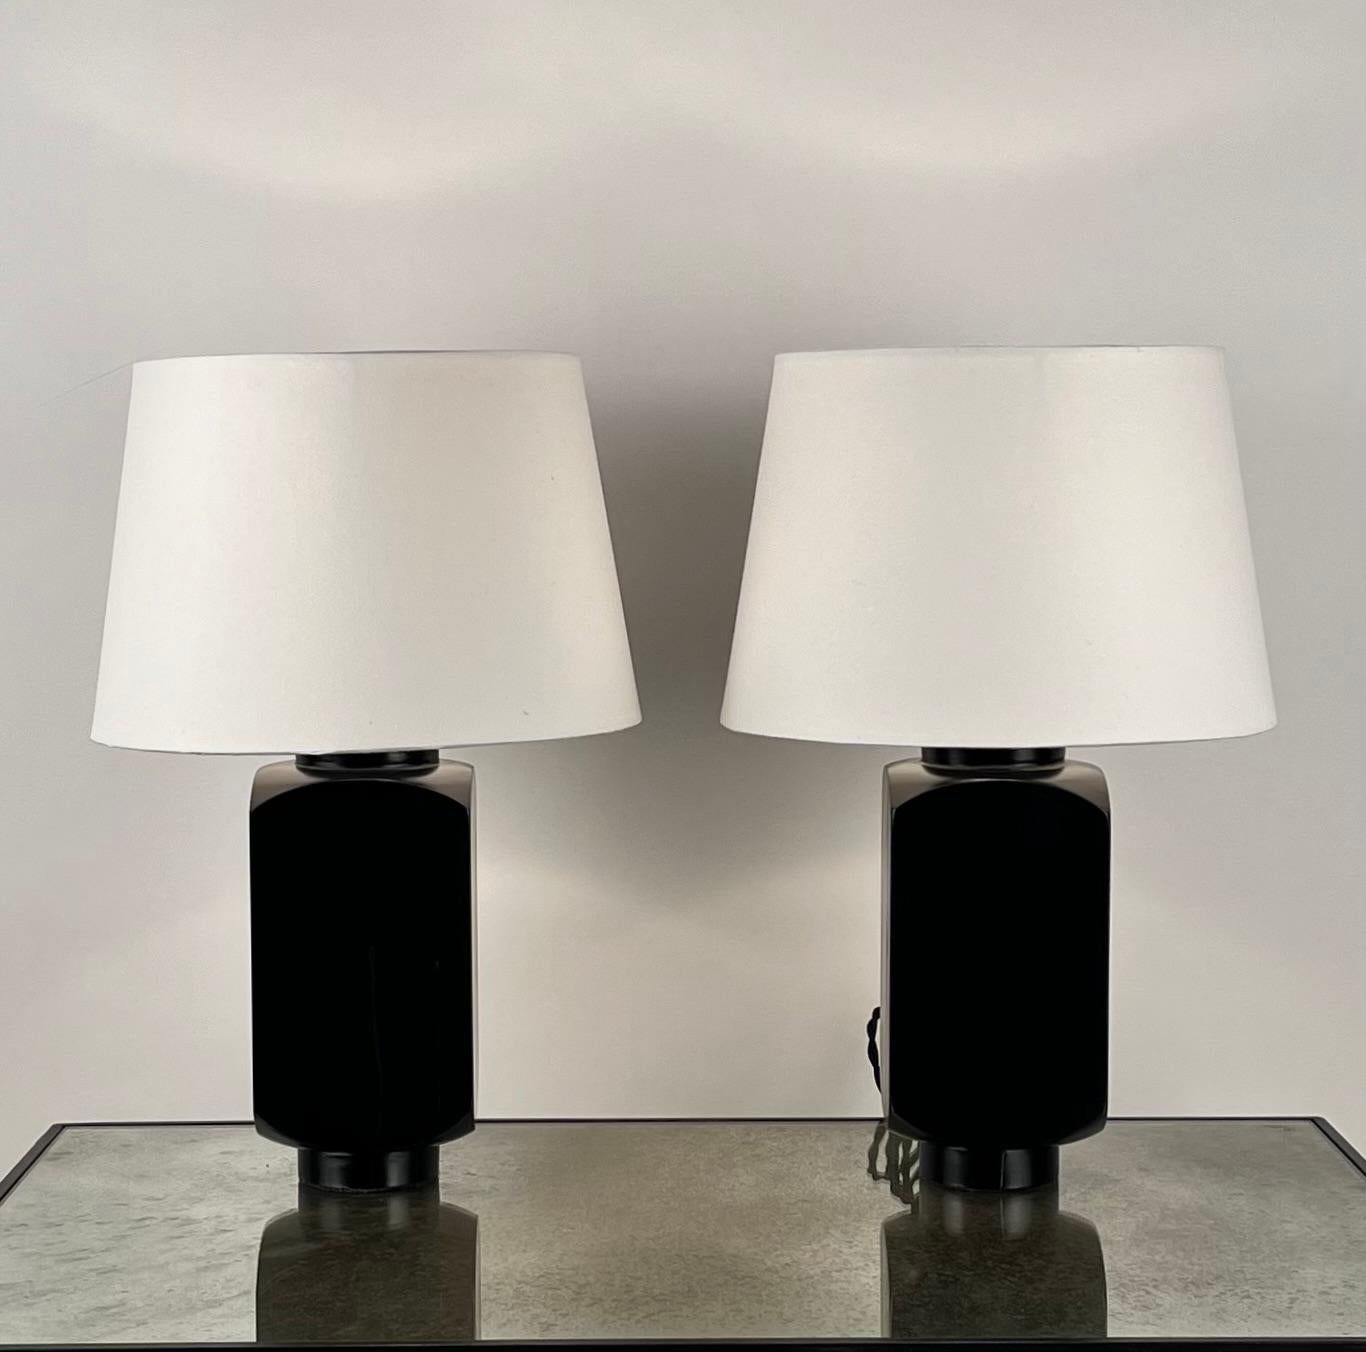 Pair of elegant 'Ébène' table lamps with parchment shades by Design Frères.

Wired with high-end twist cords and 3-way switches (on, half intensity, off). 40w filament bulbs are included in your order. European style parchment shades (no harps or